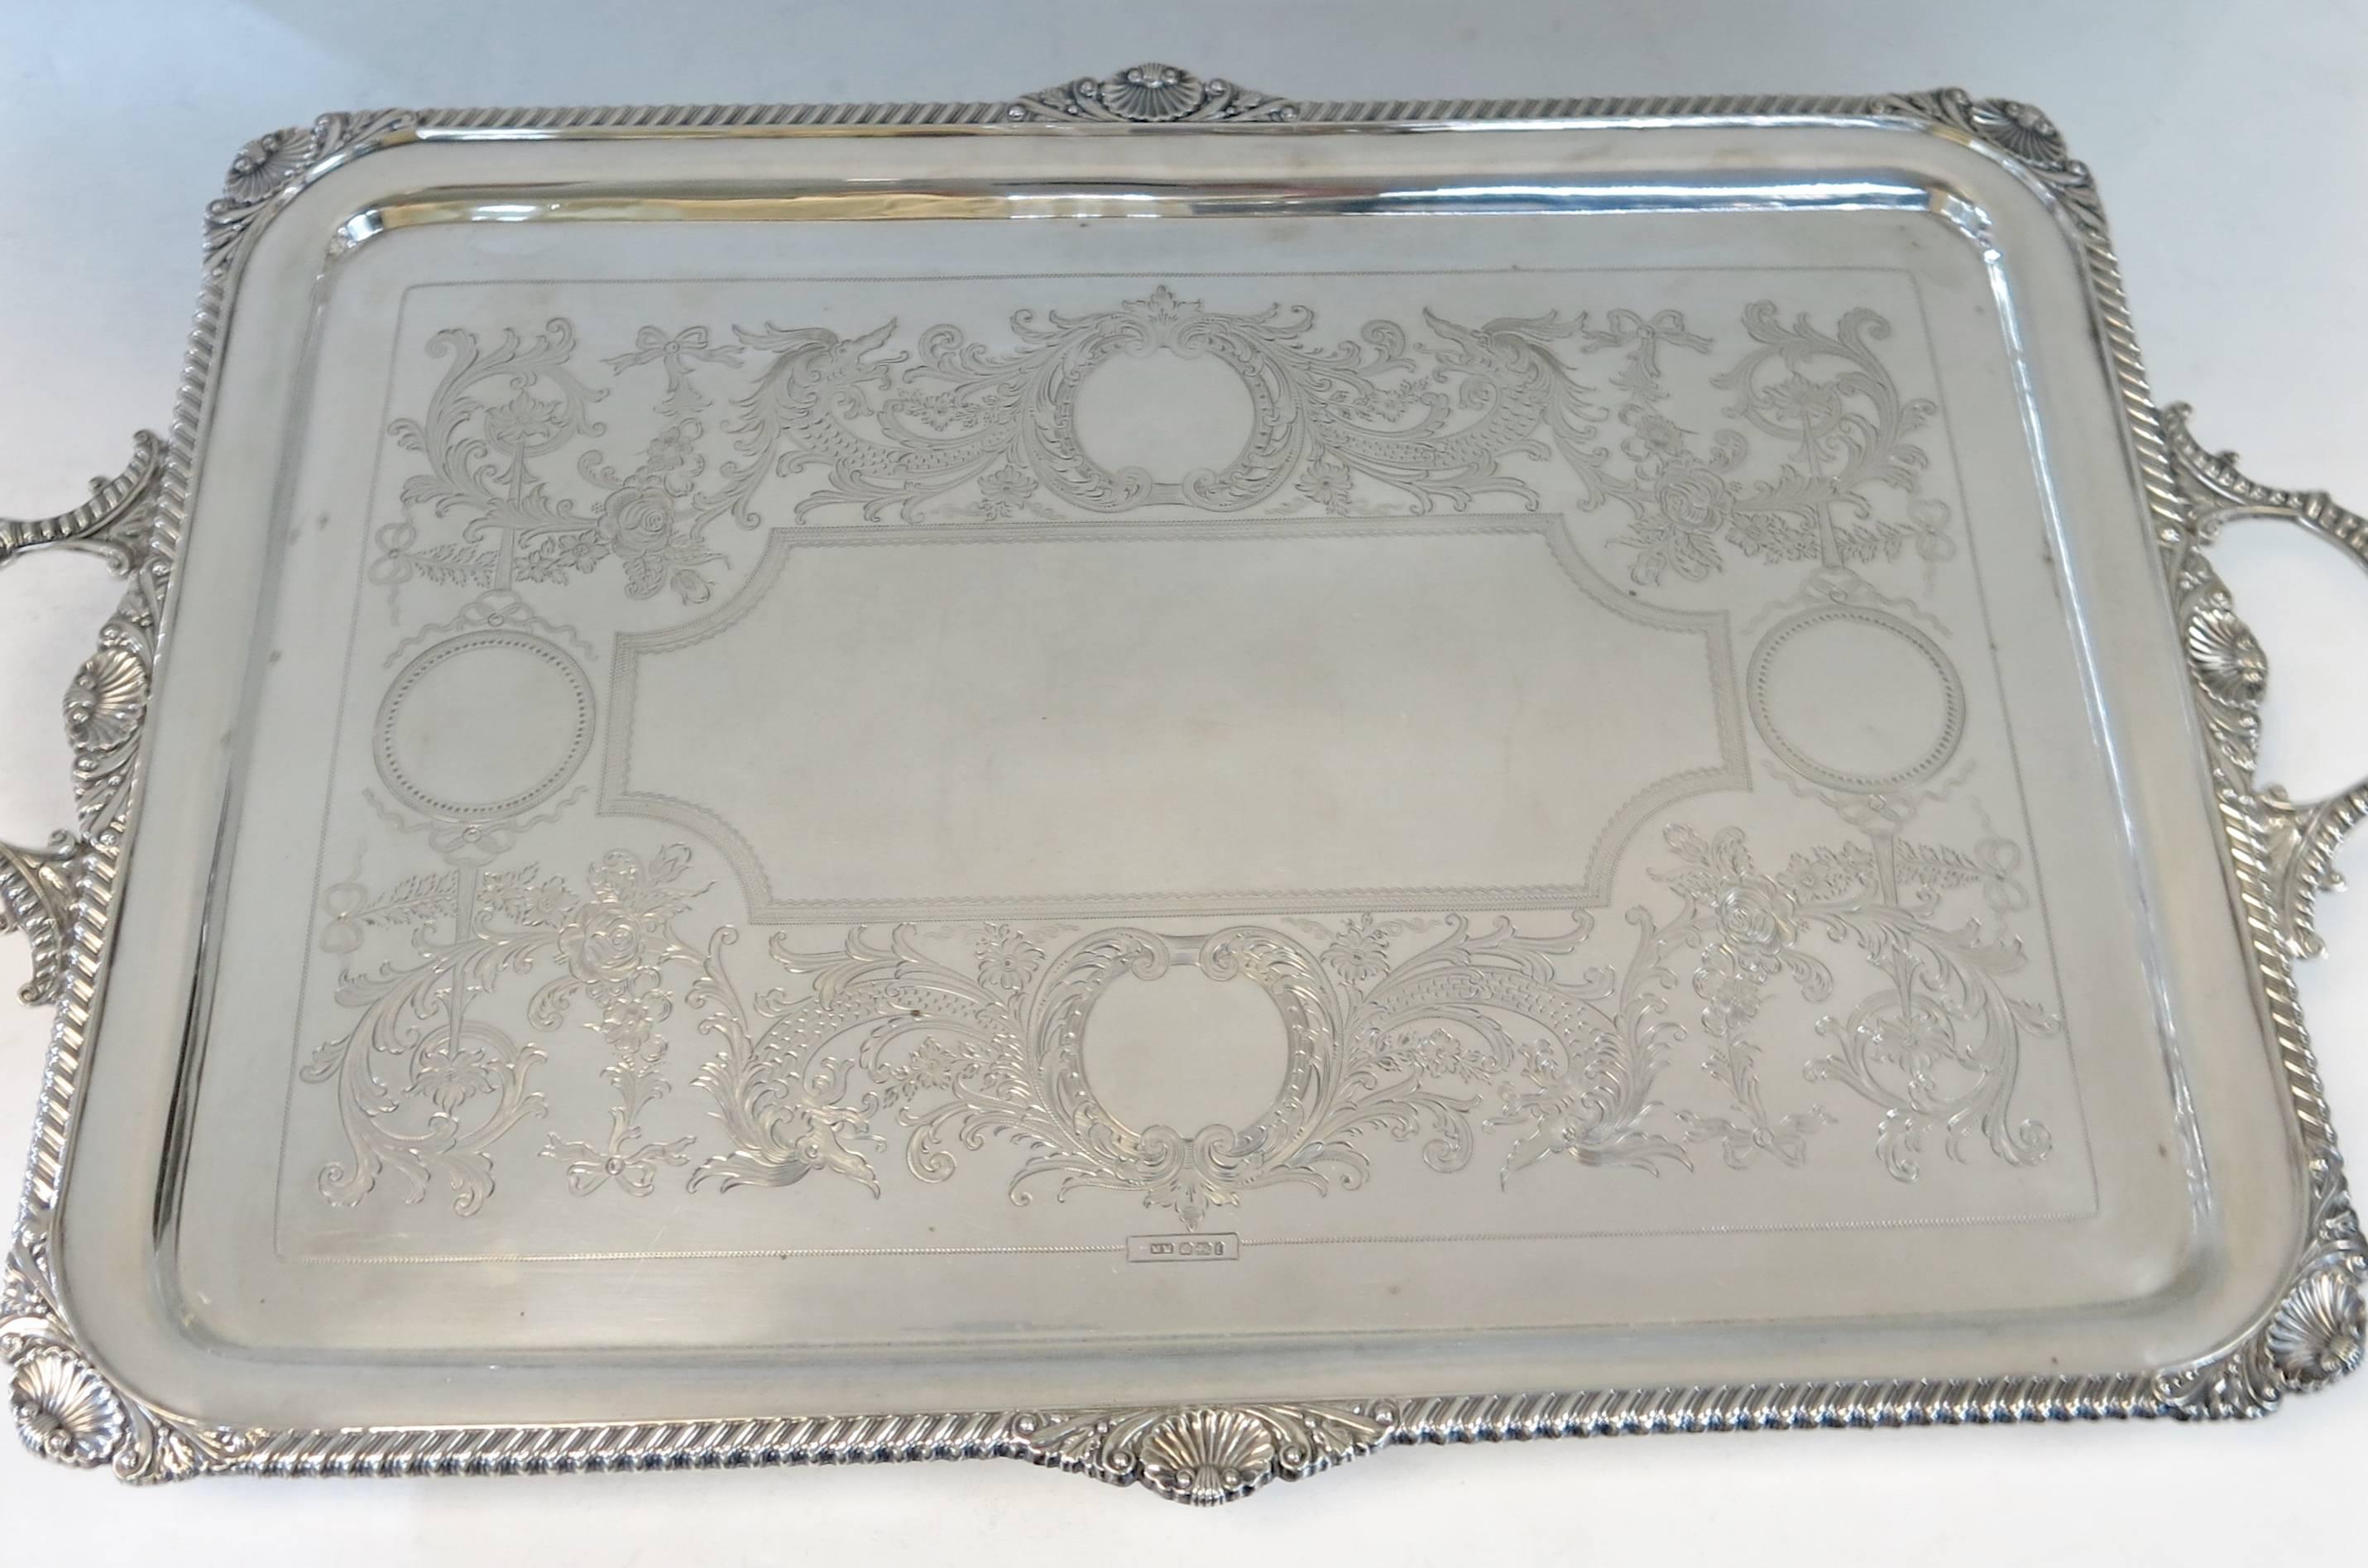 Rectangular sterling silver two handled, footed tray. The surface with hand engraved decoration, the applied border with a shell and gadroon design, matching the cast shell and gadroon handles. Tray stands on four cast gadroon rimmed feet.